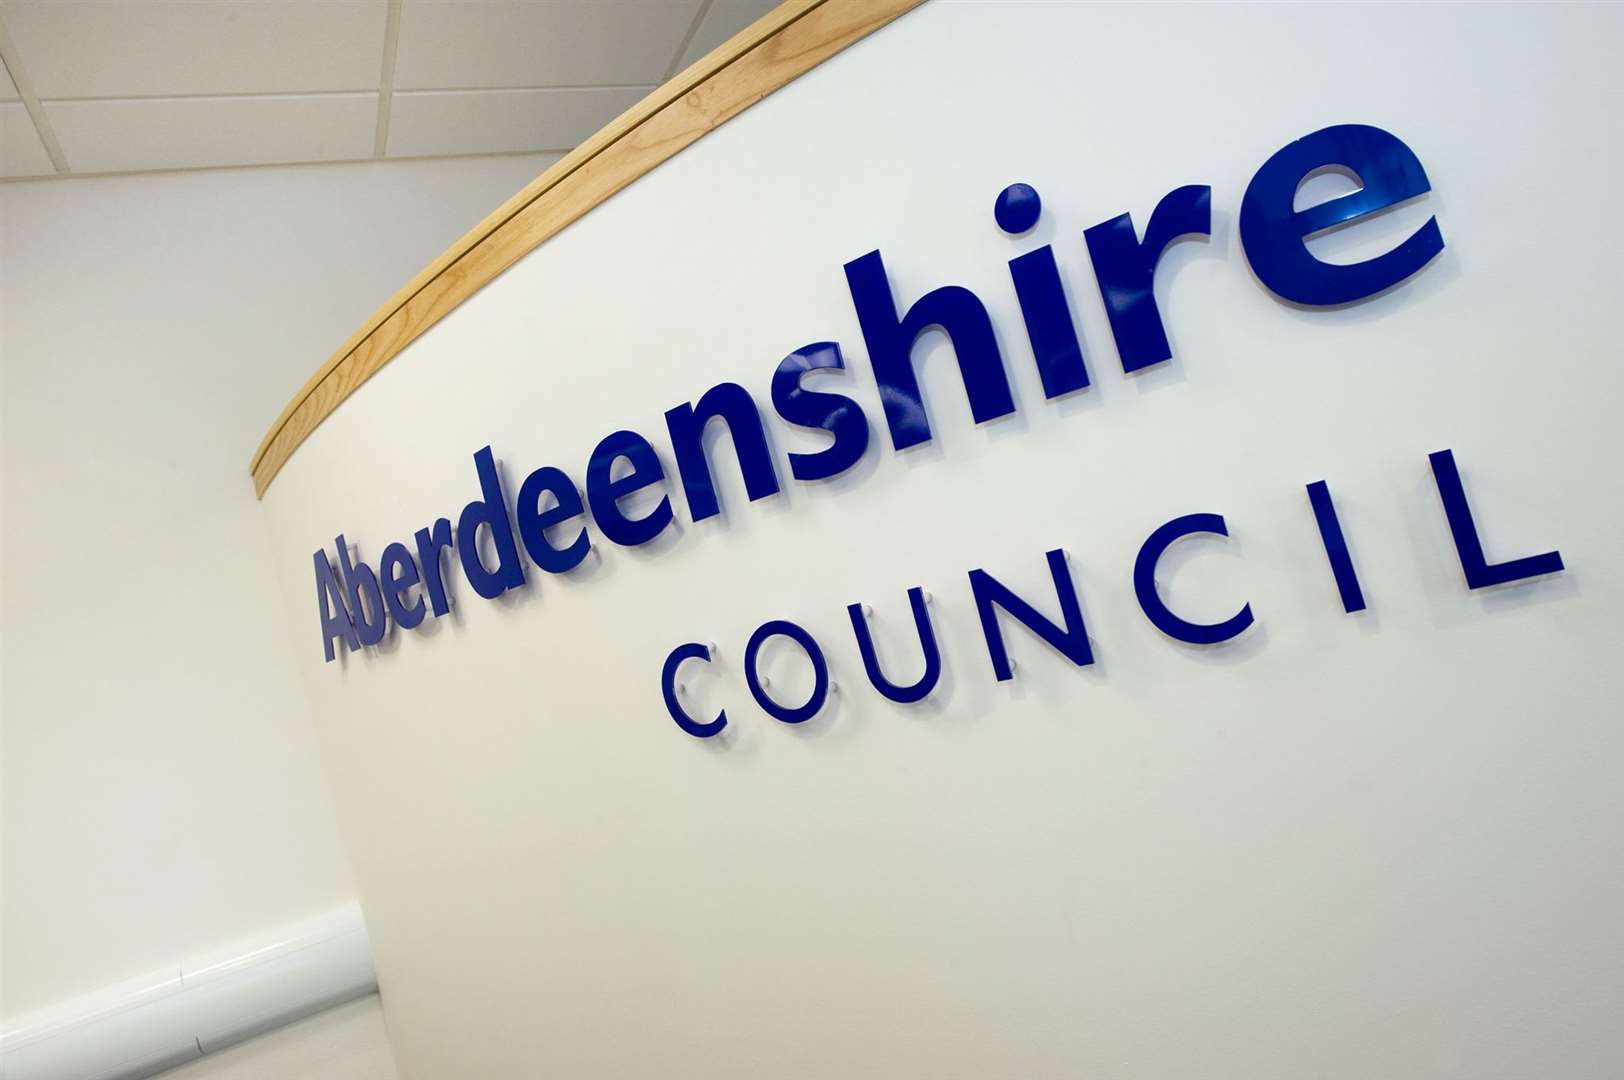 Aberdeenshire Council are inviting groups to apply for up to £50k in funding.